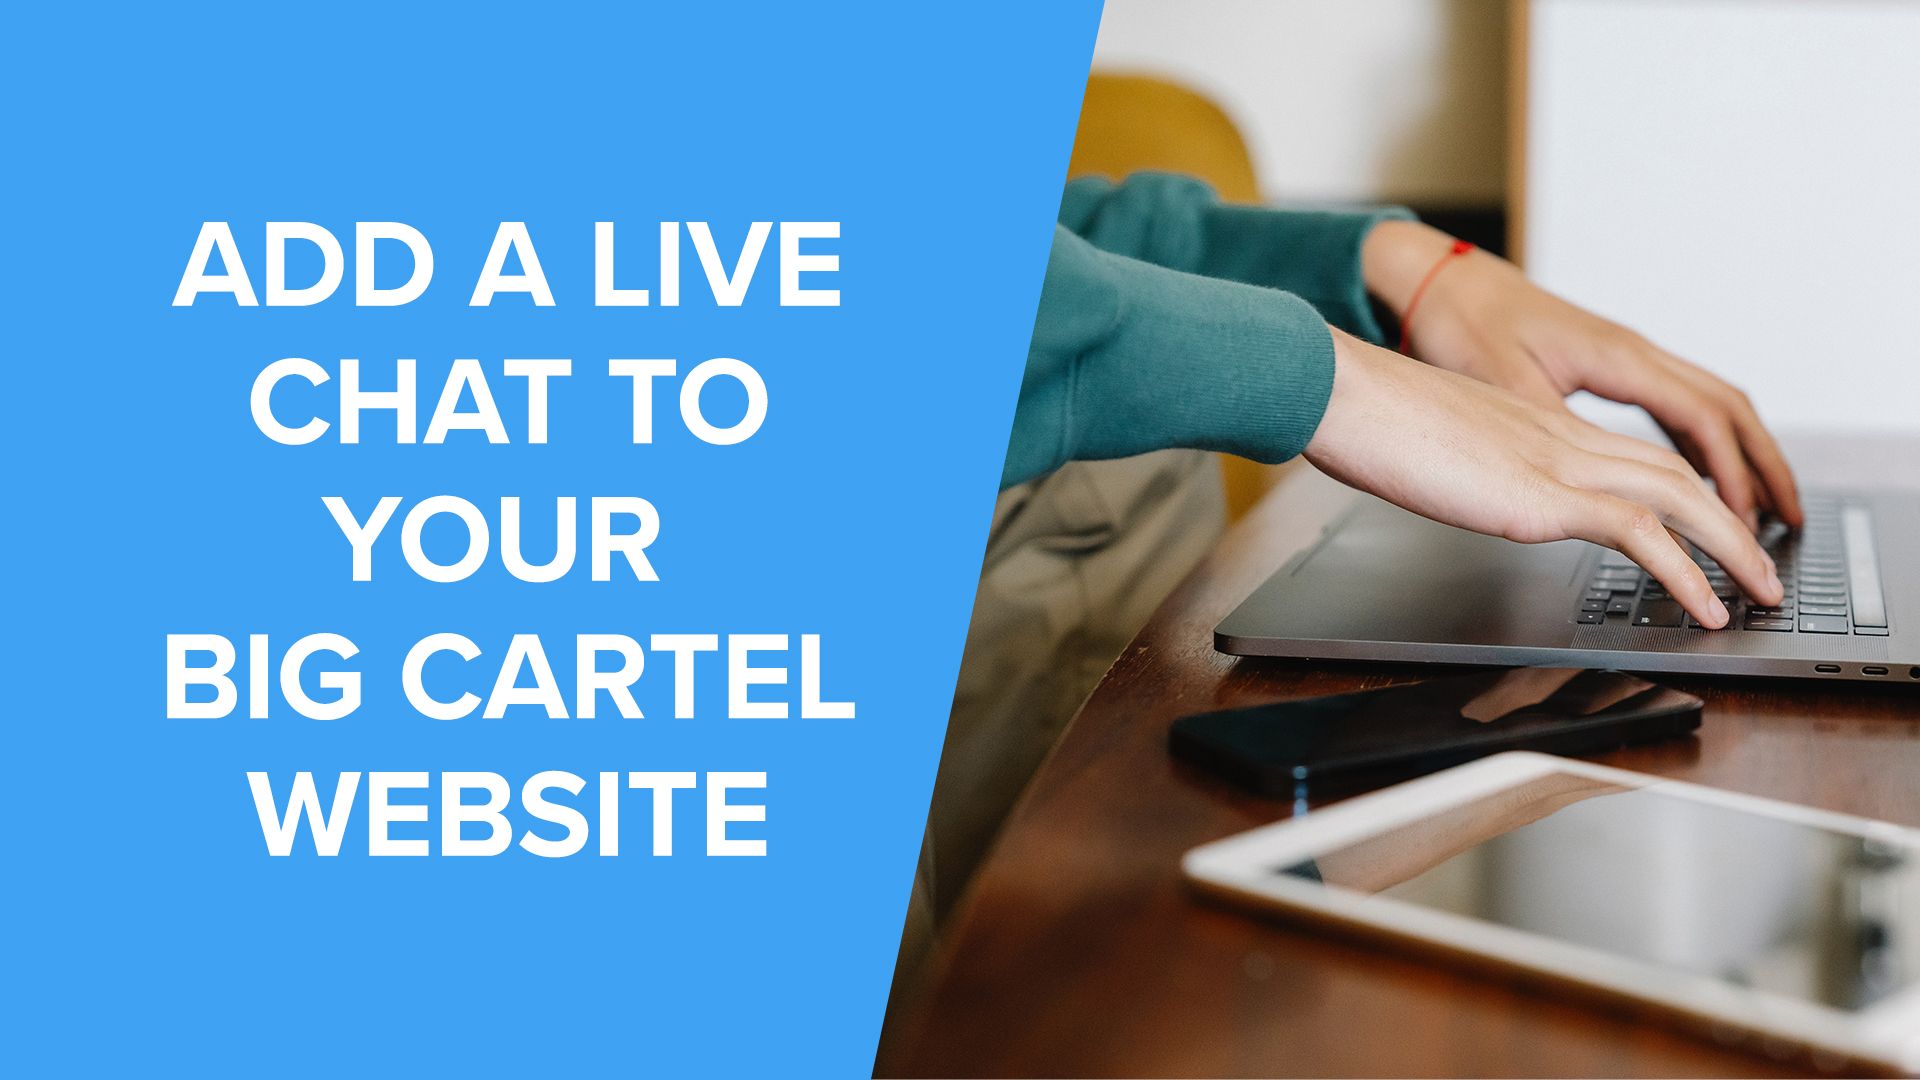 How to add a free live chat to your Big Cartel website